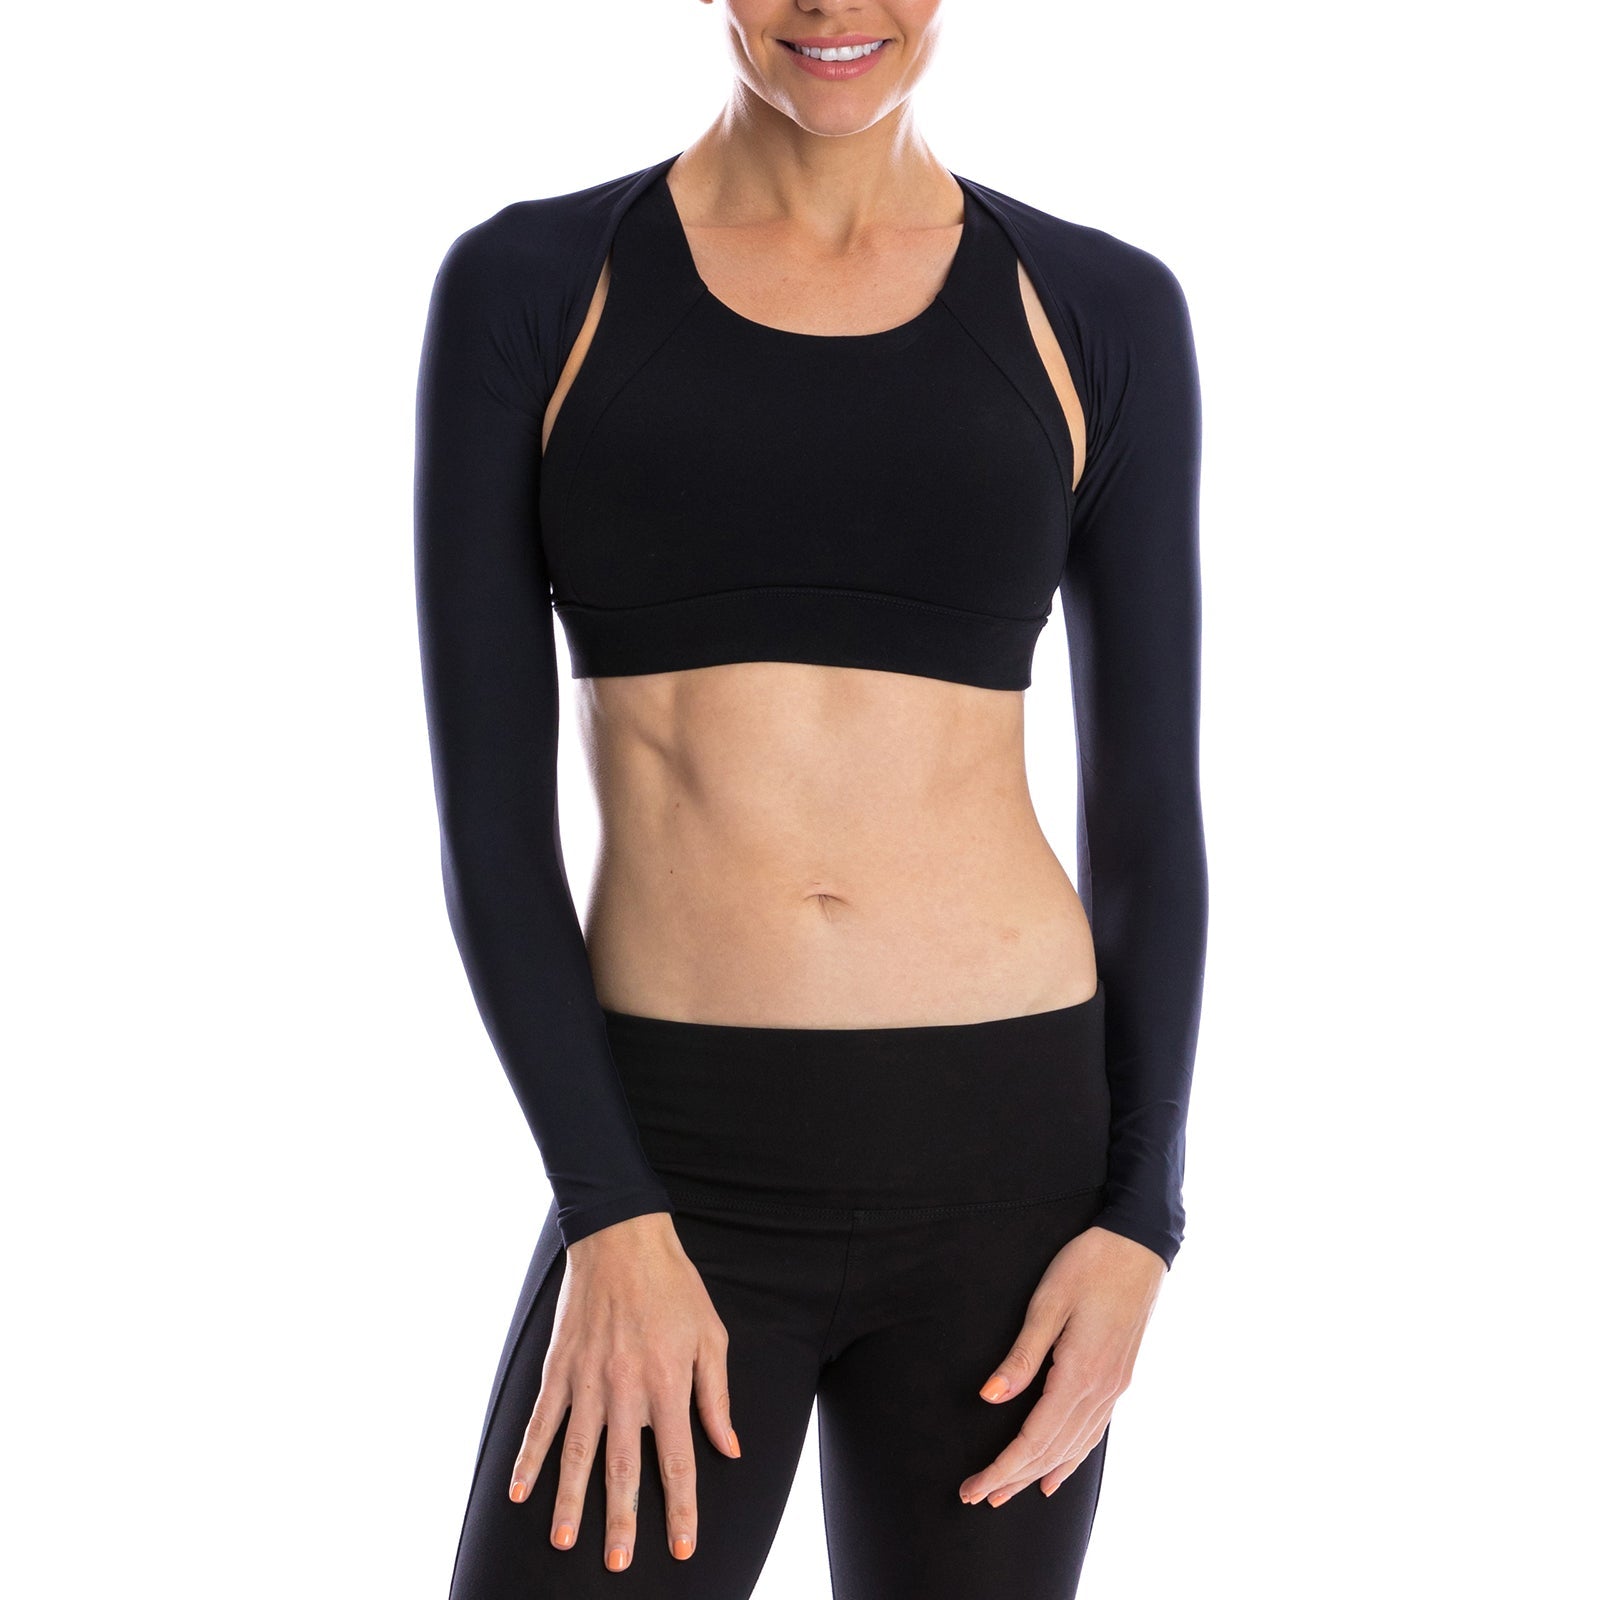 Image of a model wearing the sun protective shoulder wrap.